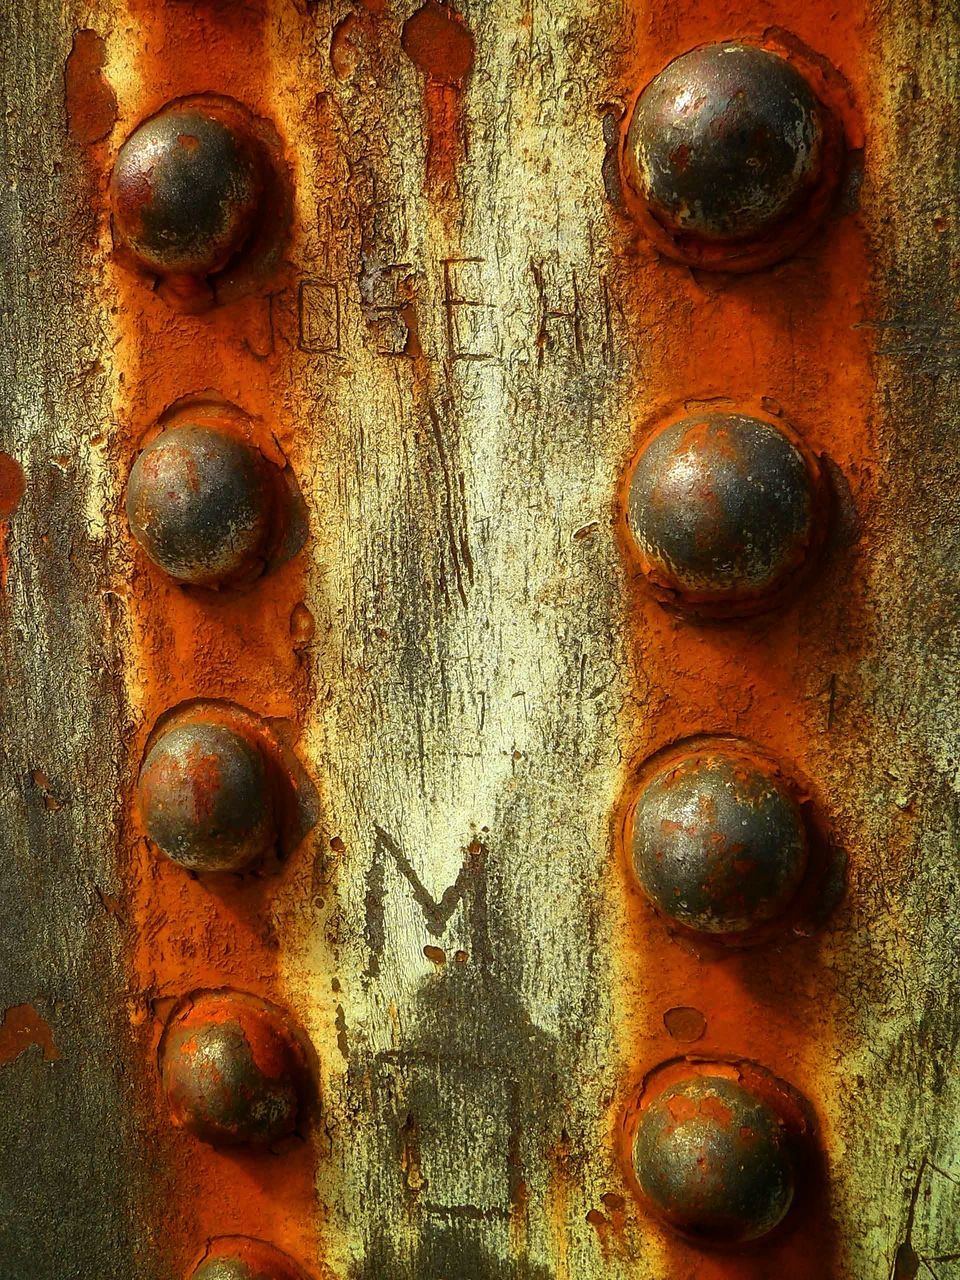 metal, backgrounds, close-up, full frame, rusty, no people, textured, door, wood, old, entrance, rust, ancient history, weathered, pattern, painting, art, bolt, brown, macro photography, temple